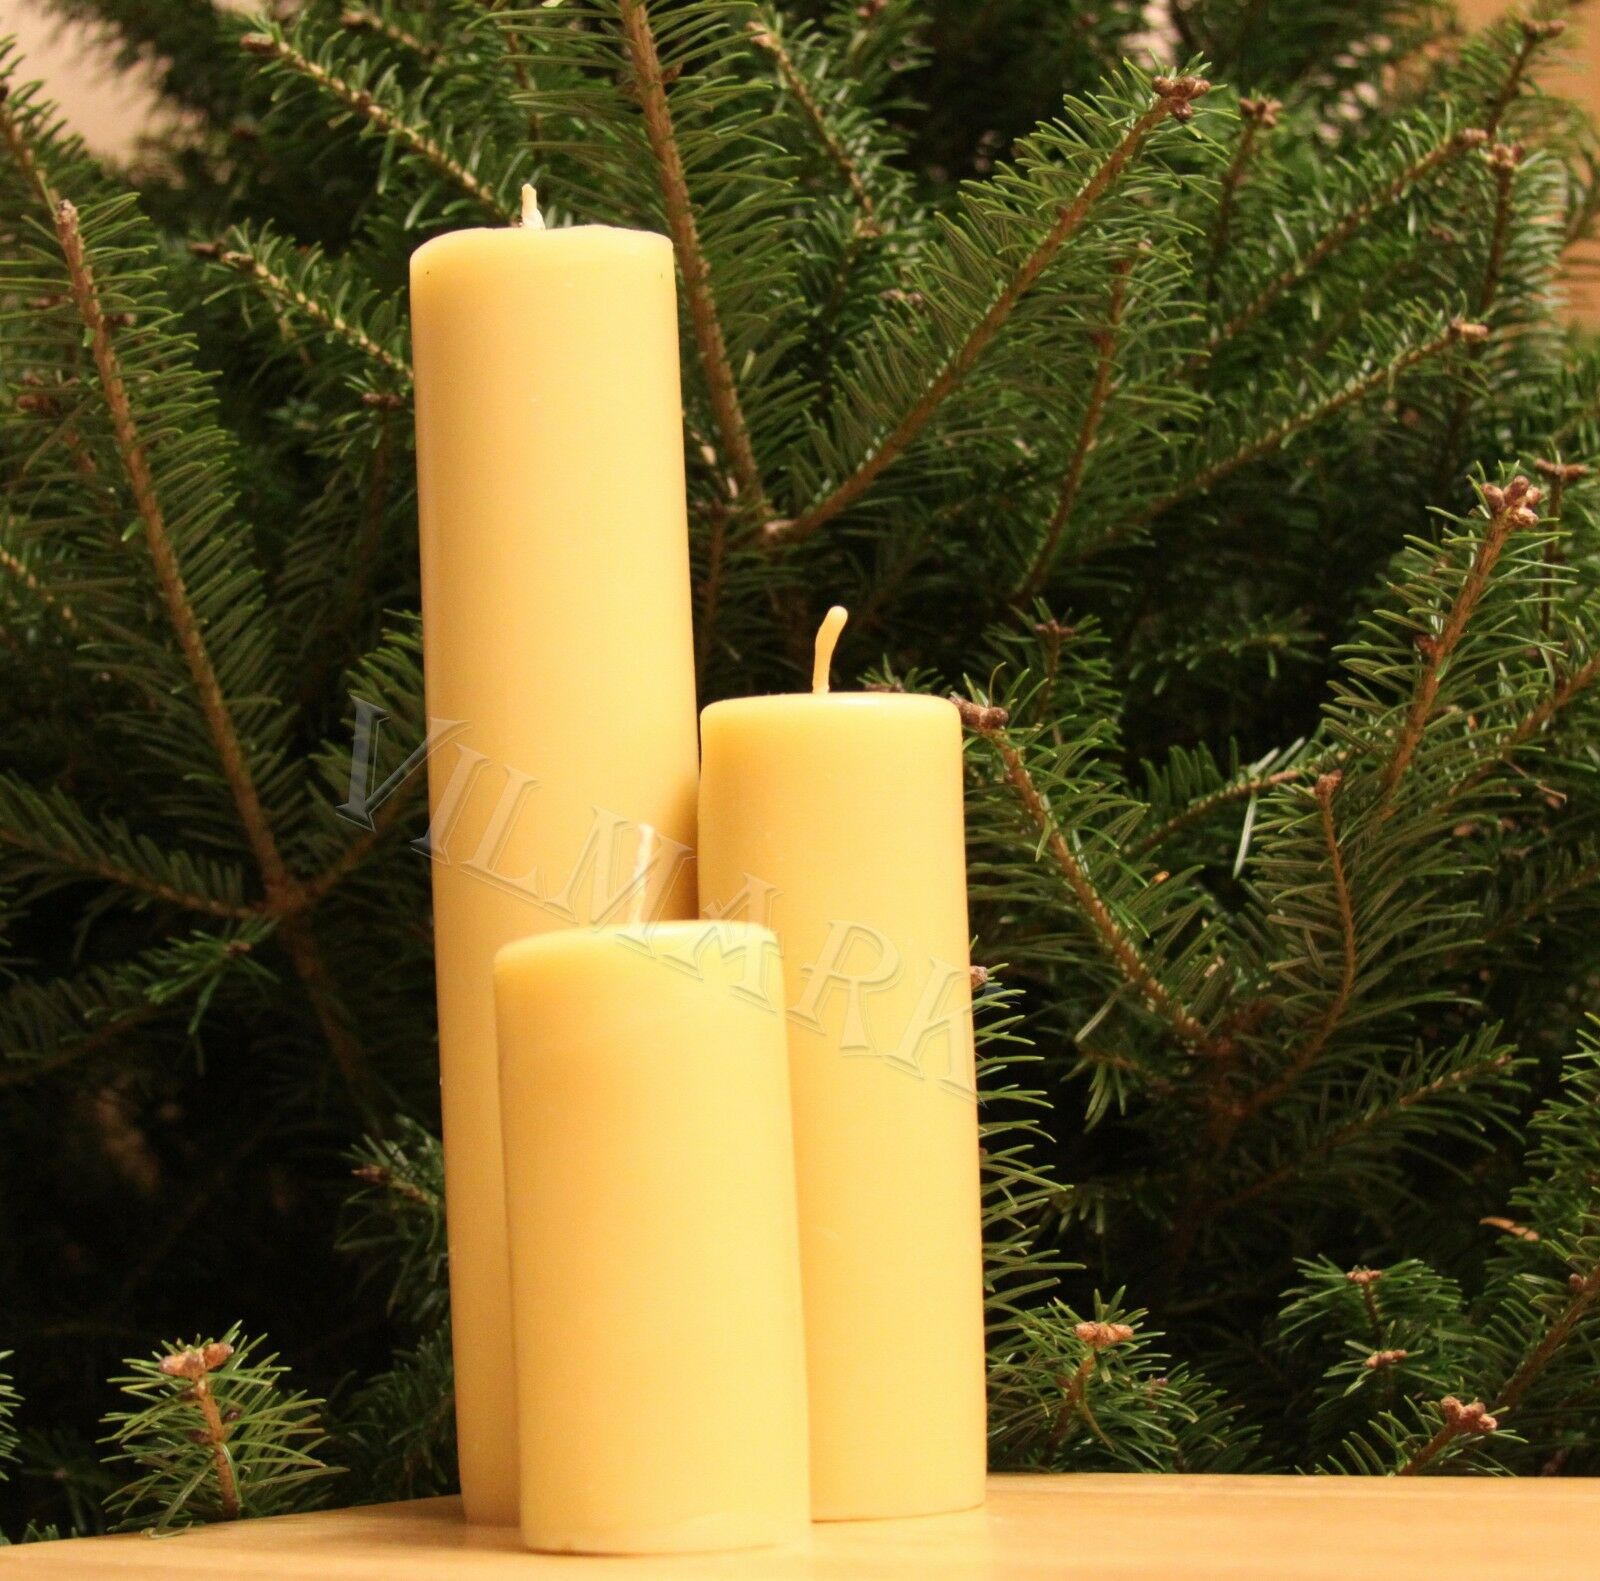 Handmade 100% Pure Beeswax Candles Cotton Wick